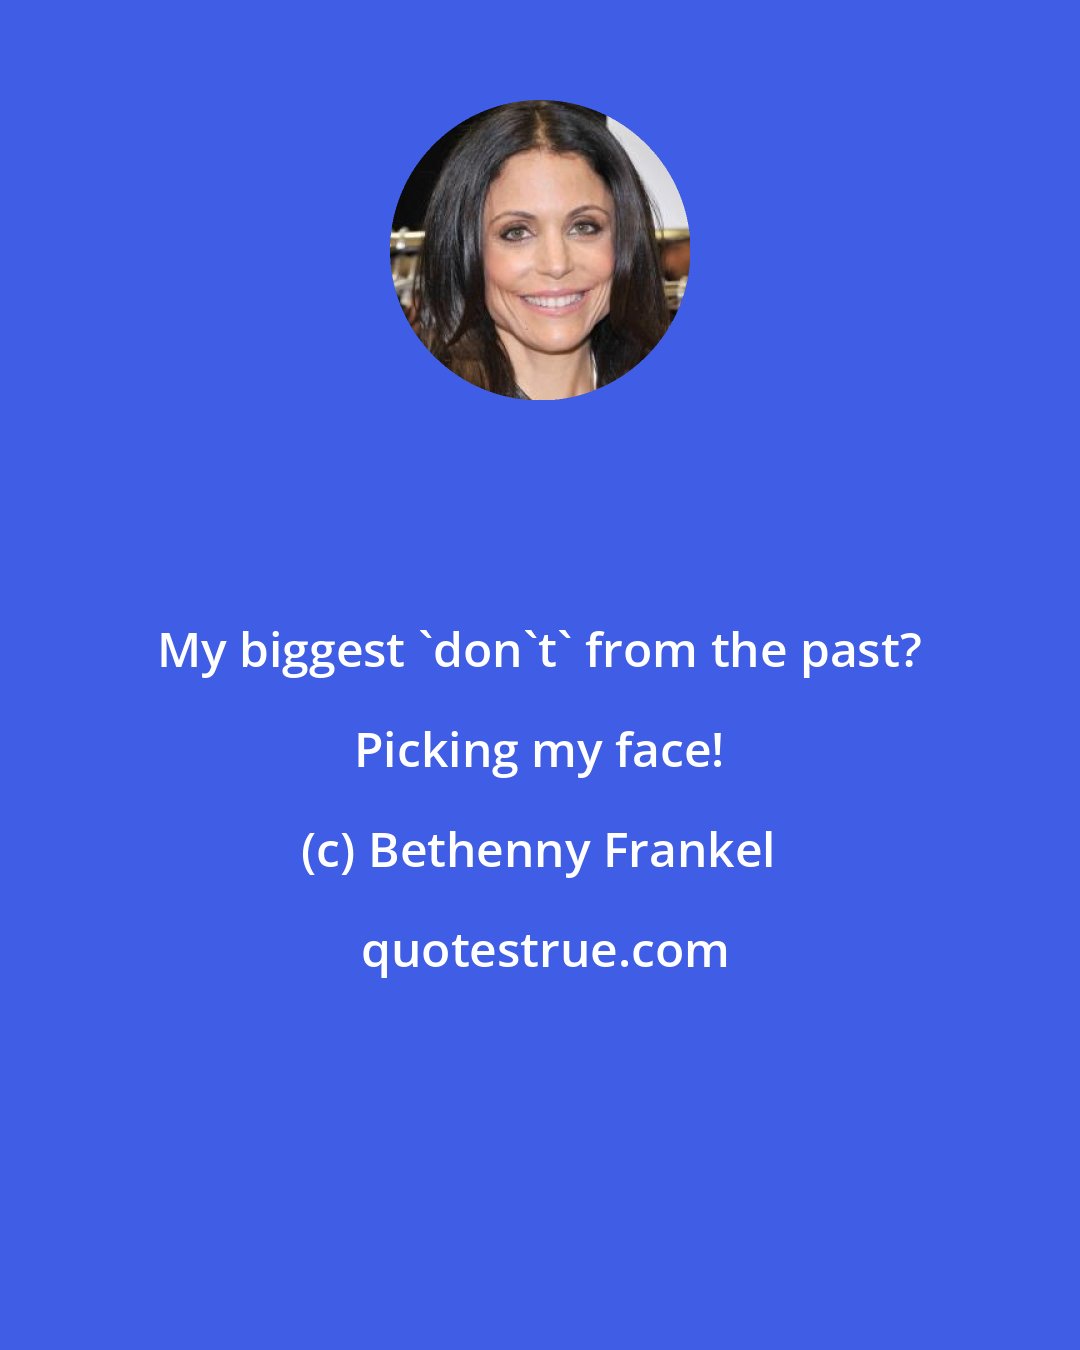 Bethenny Frankel: My biggest 'don't' from the past? Picking my face!